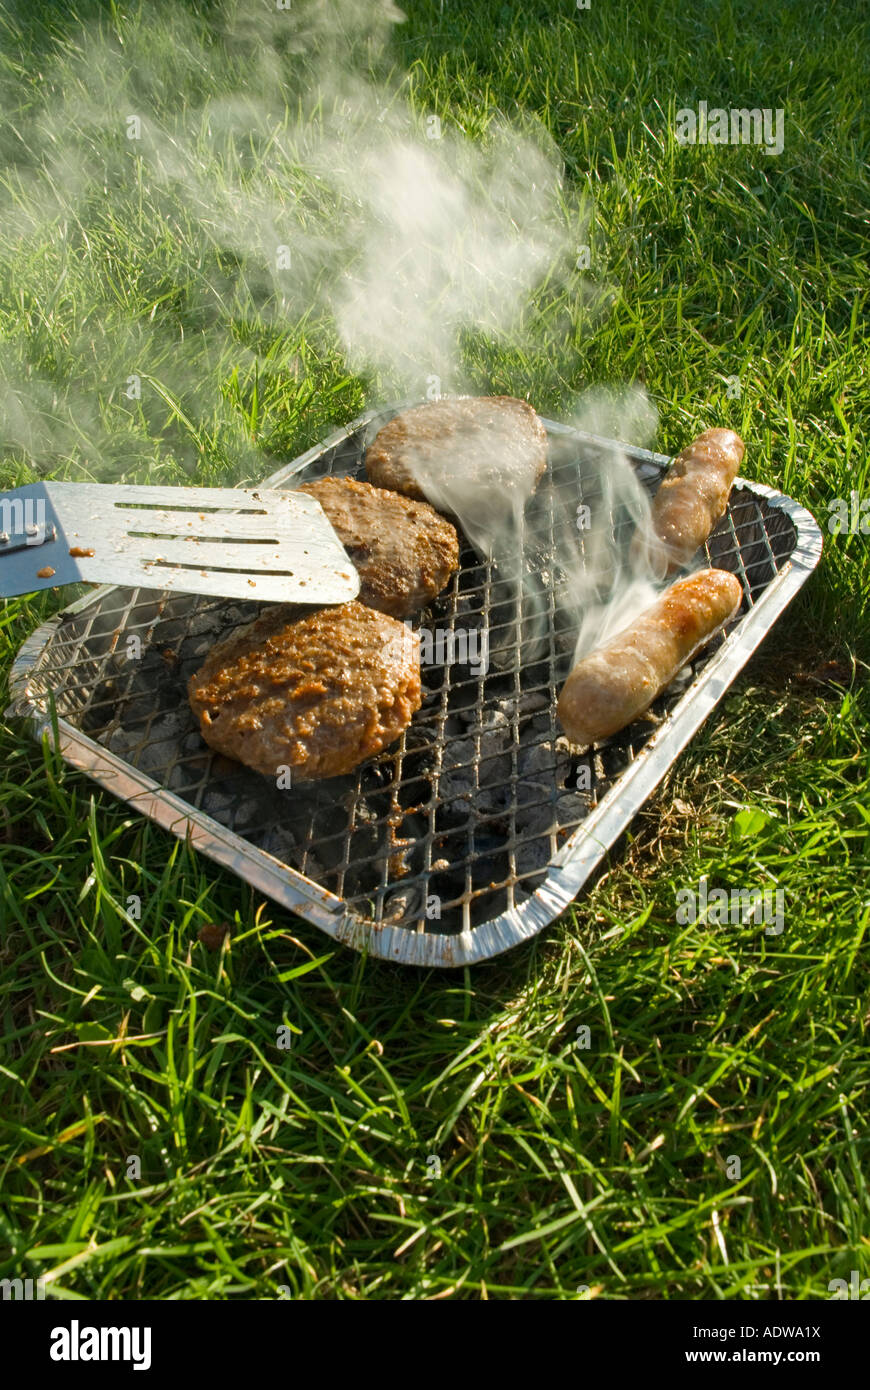 Barbecue - disposable bbq Stock Photo - Alamy